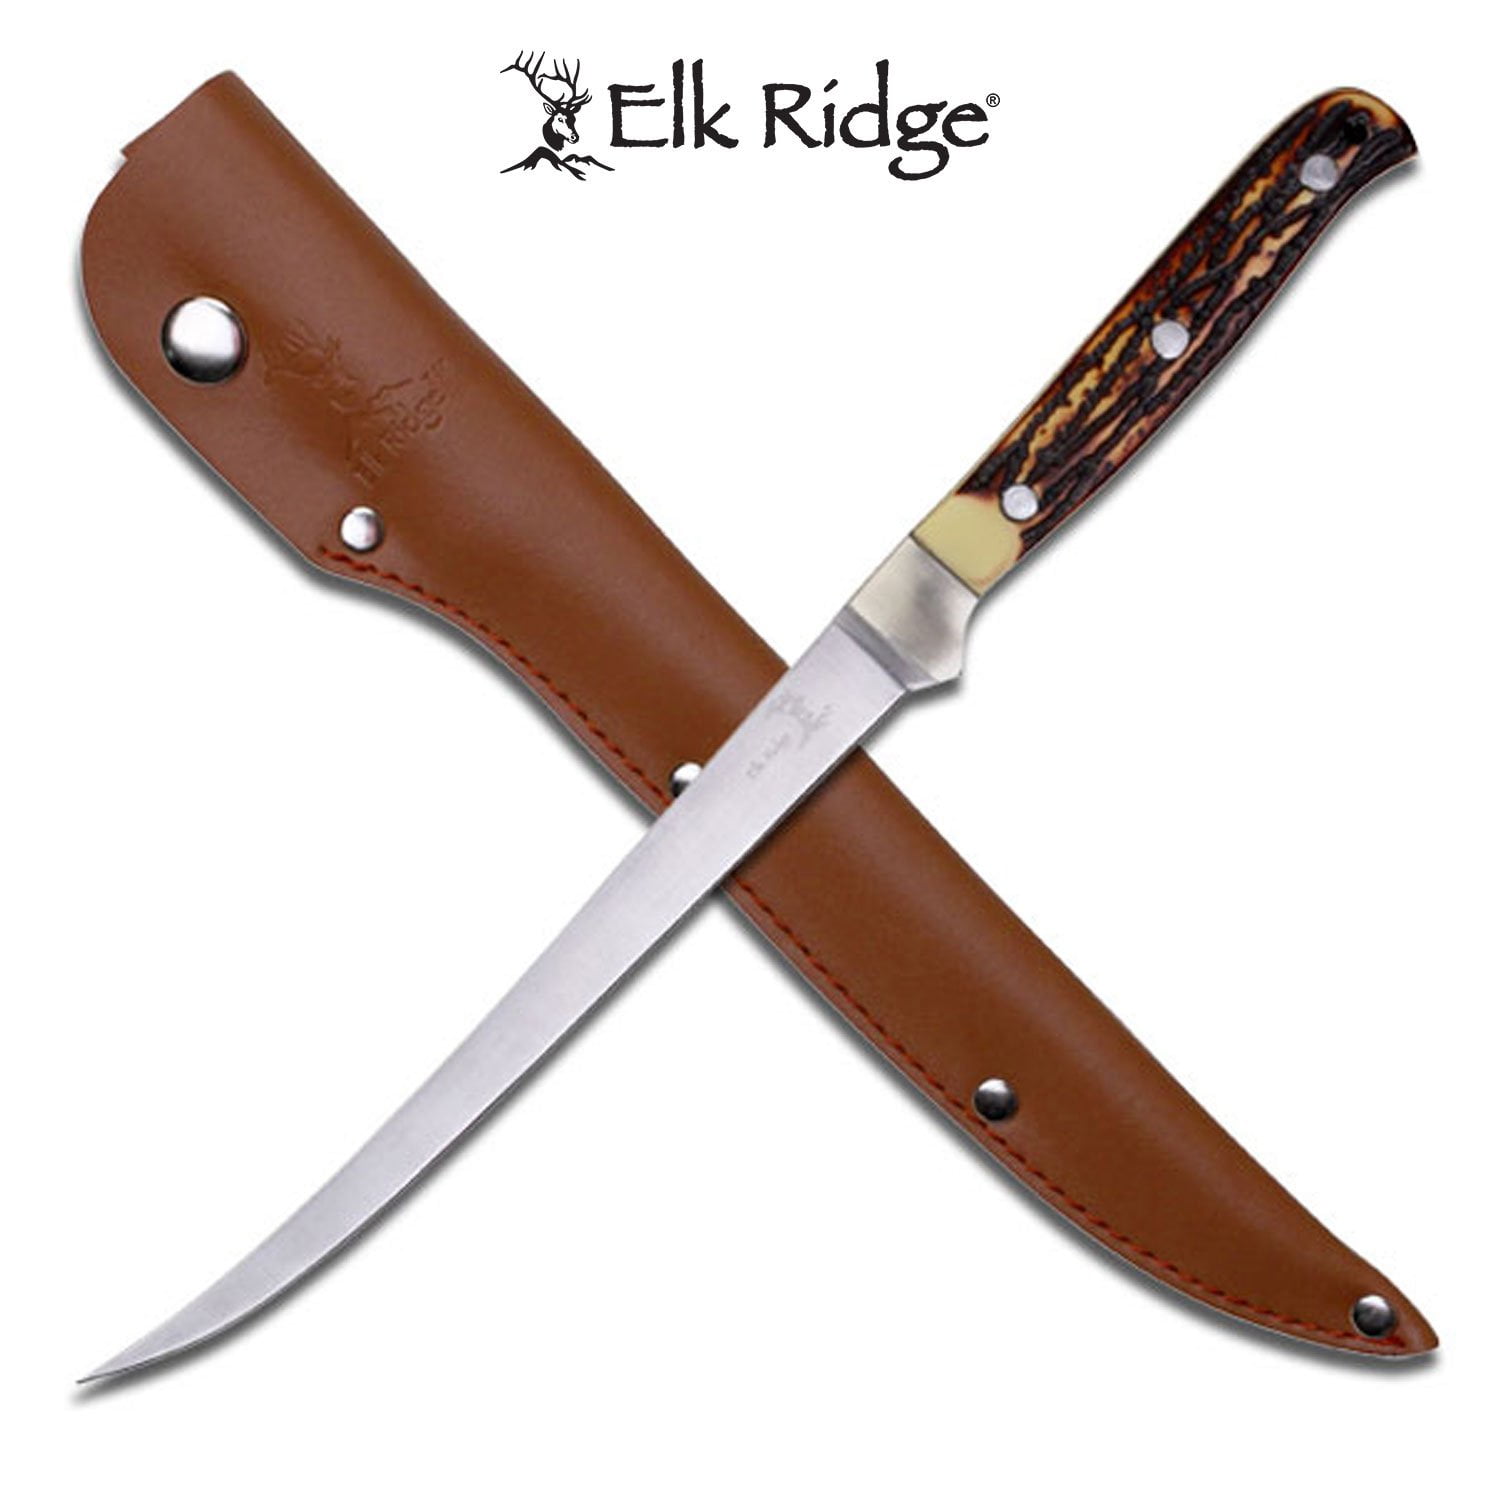 Elk Ridge - Outdoors Fixed Blade Fillet Knife - 12.25-in Overall